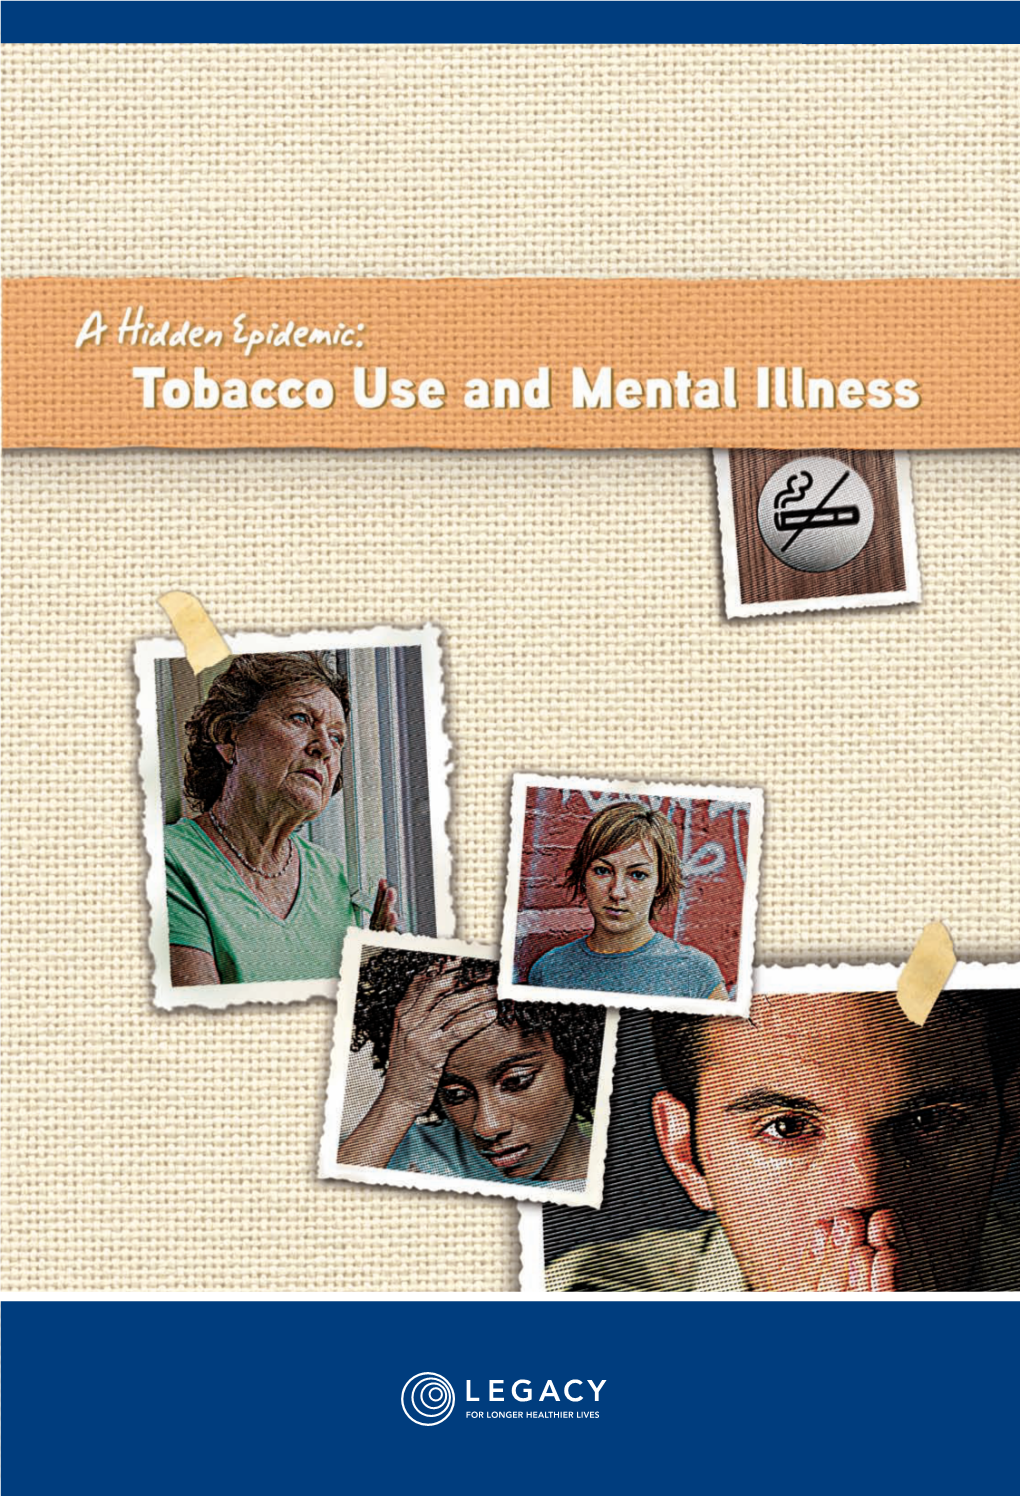 A Hidden Epidemic: Tobacco Use and Mental Illness